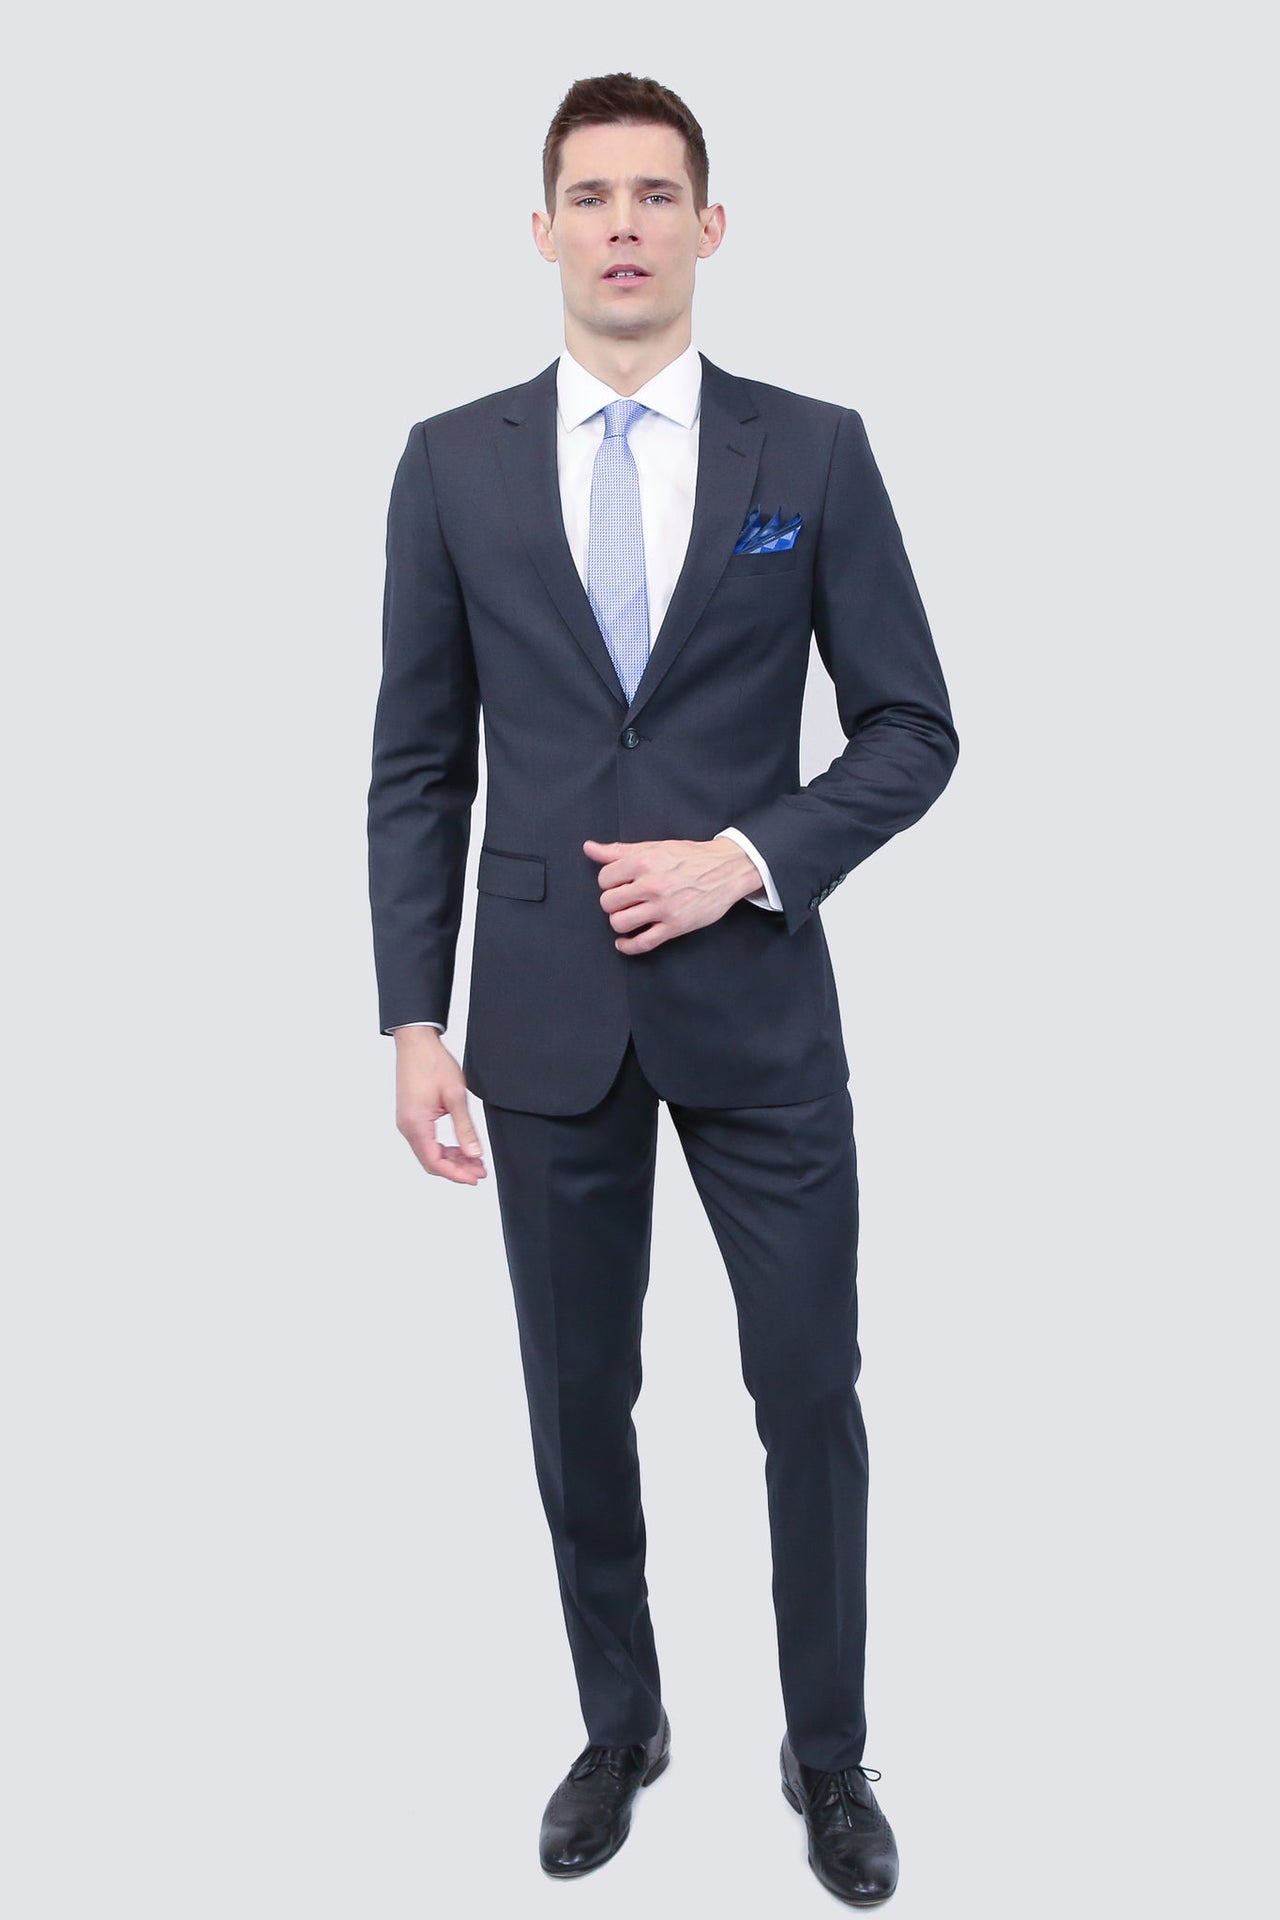 tailors stretch blend suit charcoal grey modern or slim fit